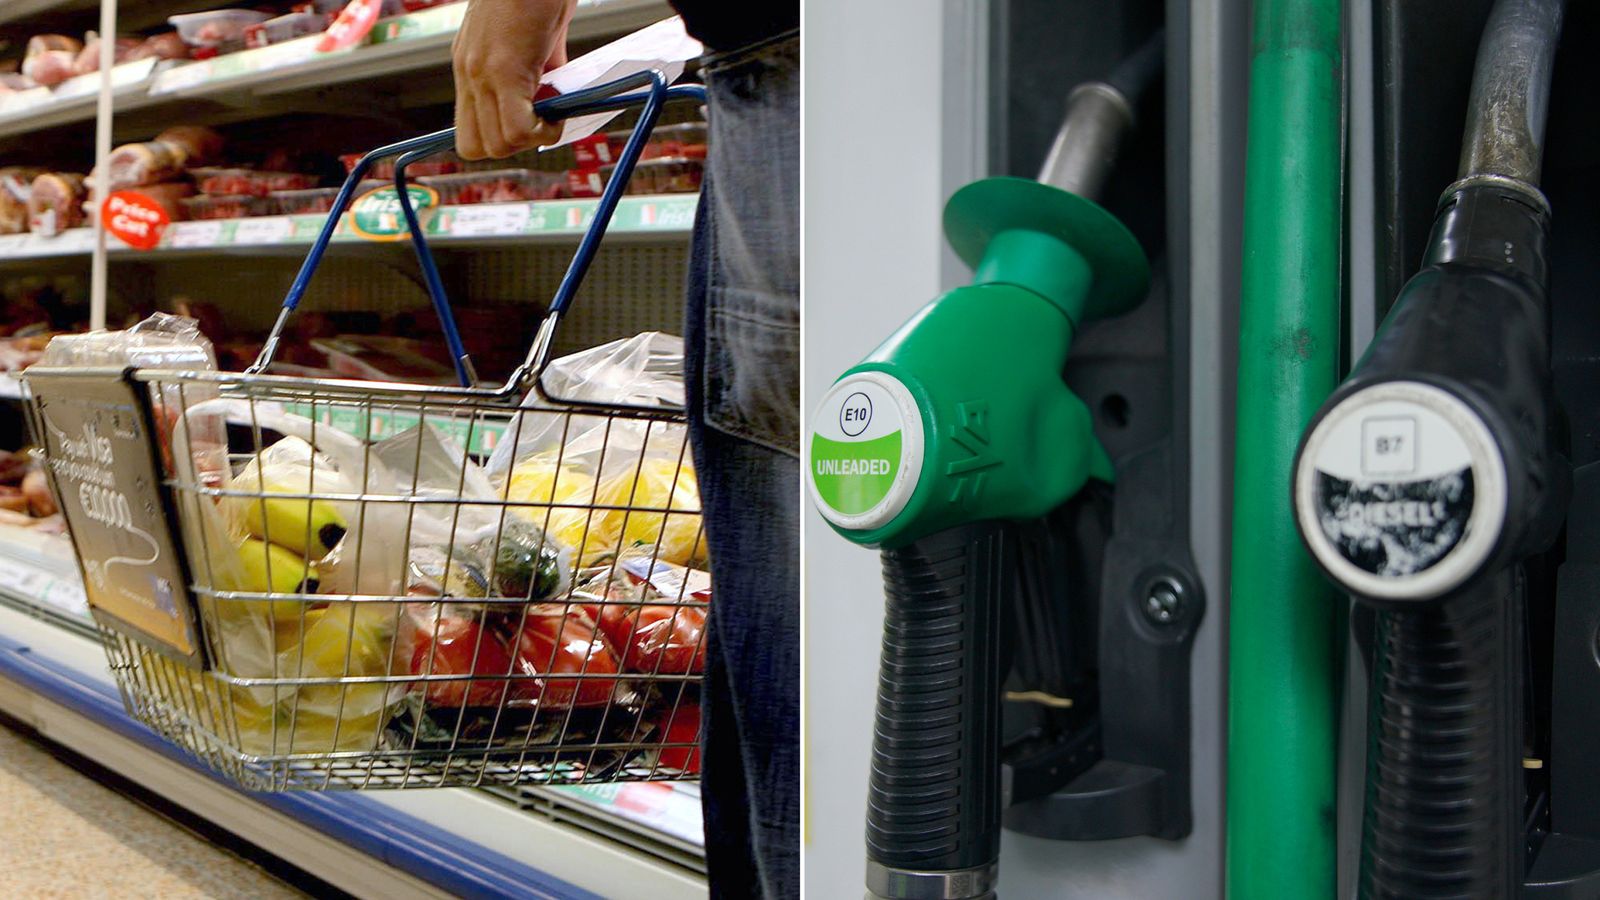 Cost of living: Supermarket bosses back fuel transparency but defend food prices